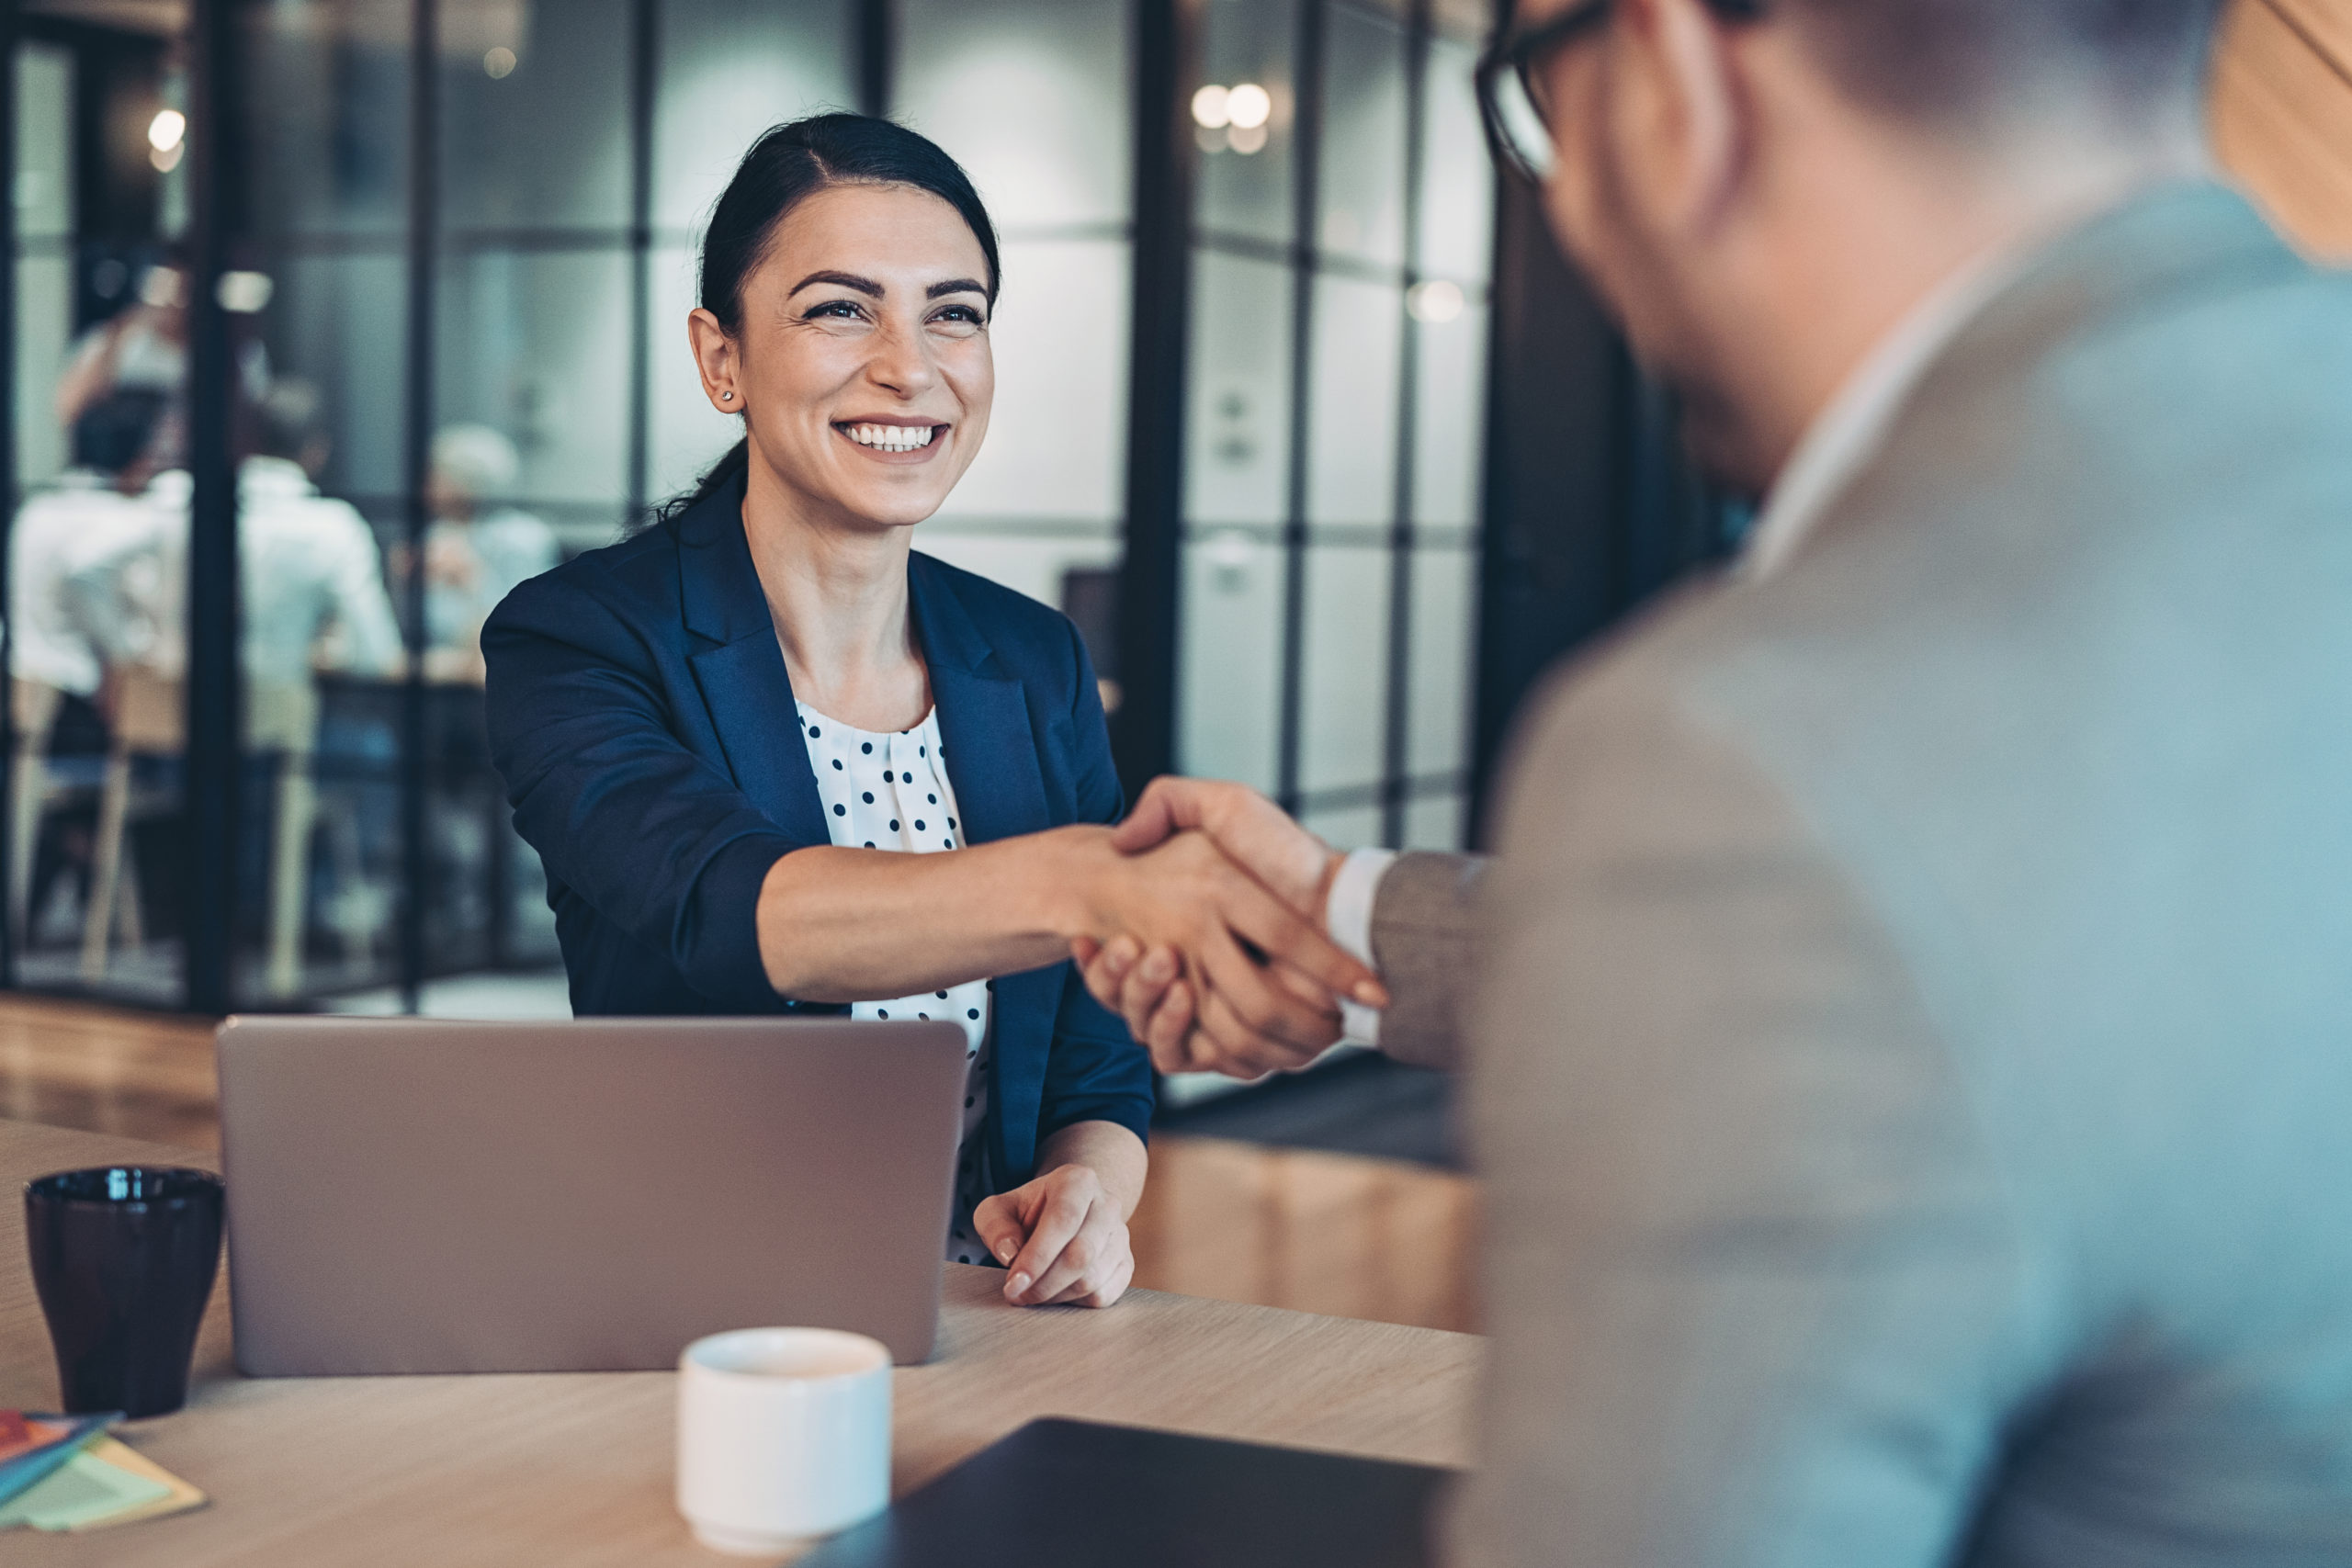 interviewee shaking interviewer's hand to introduce herself - this is an example of using an essential soft skills